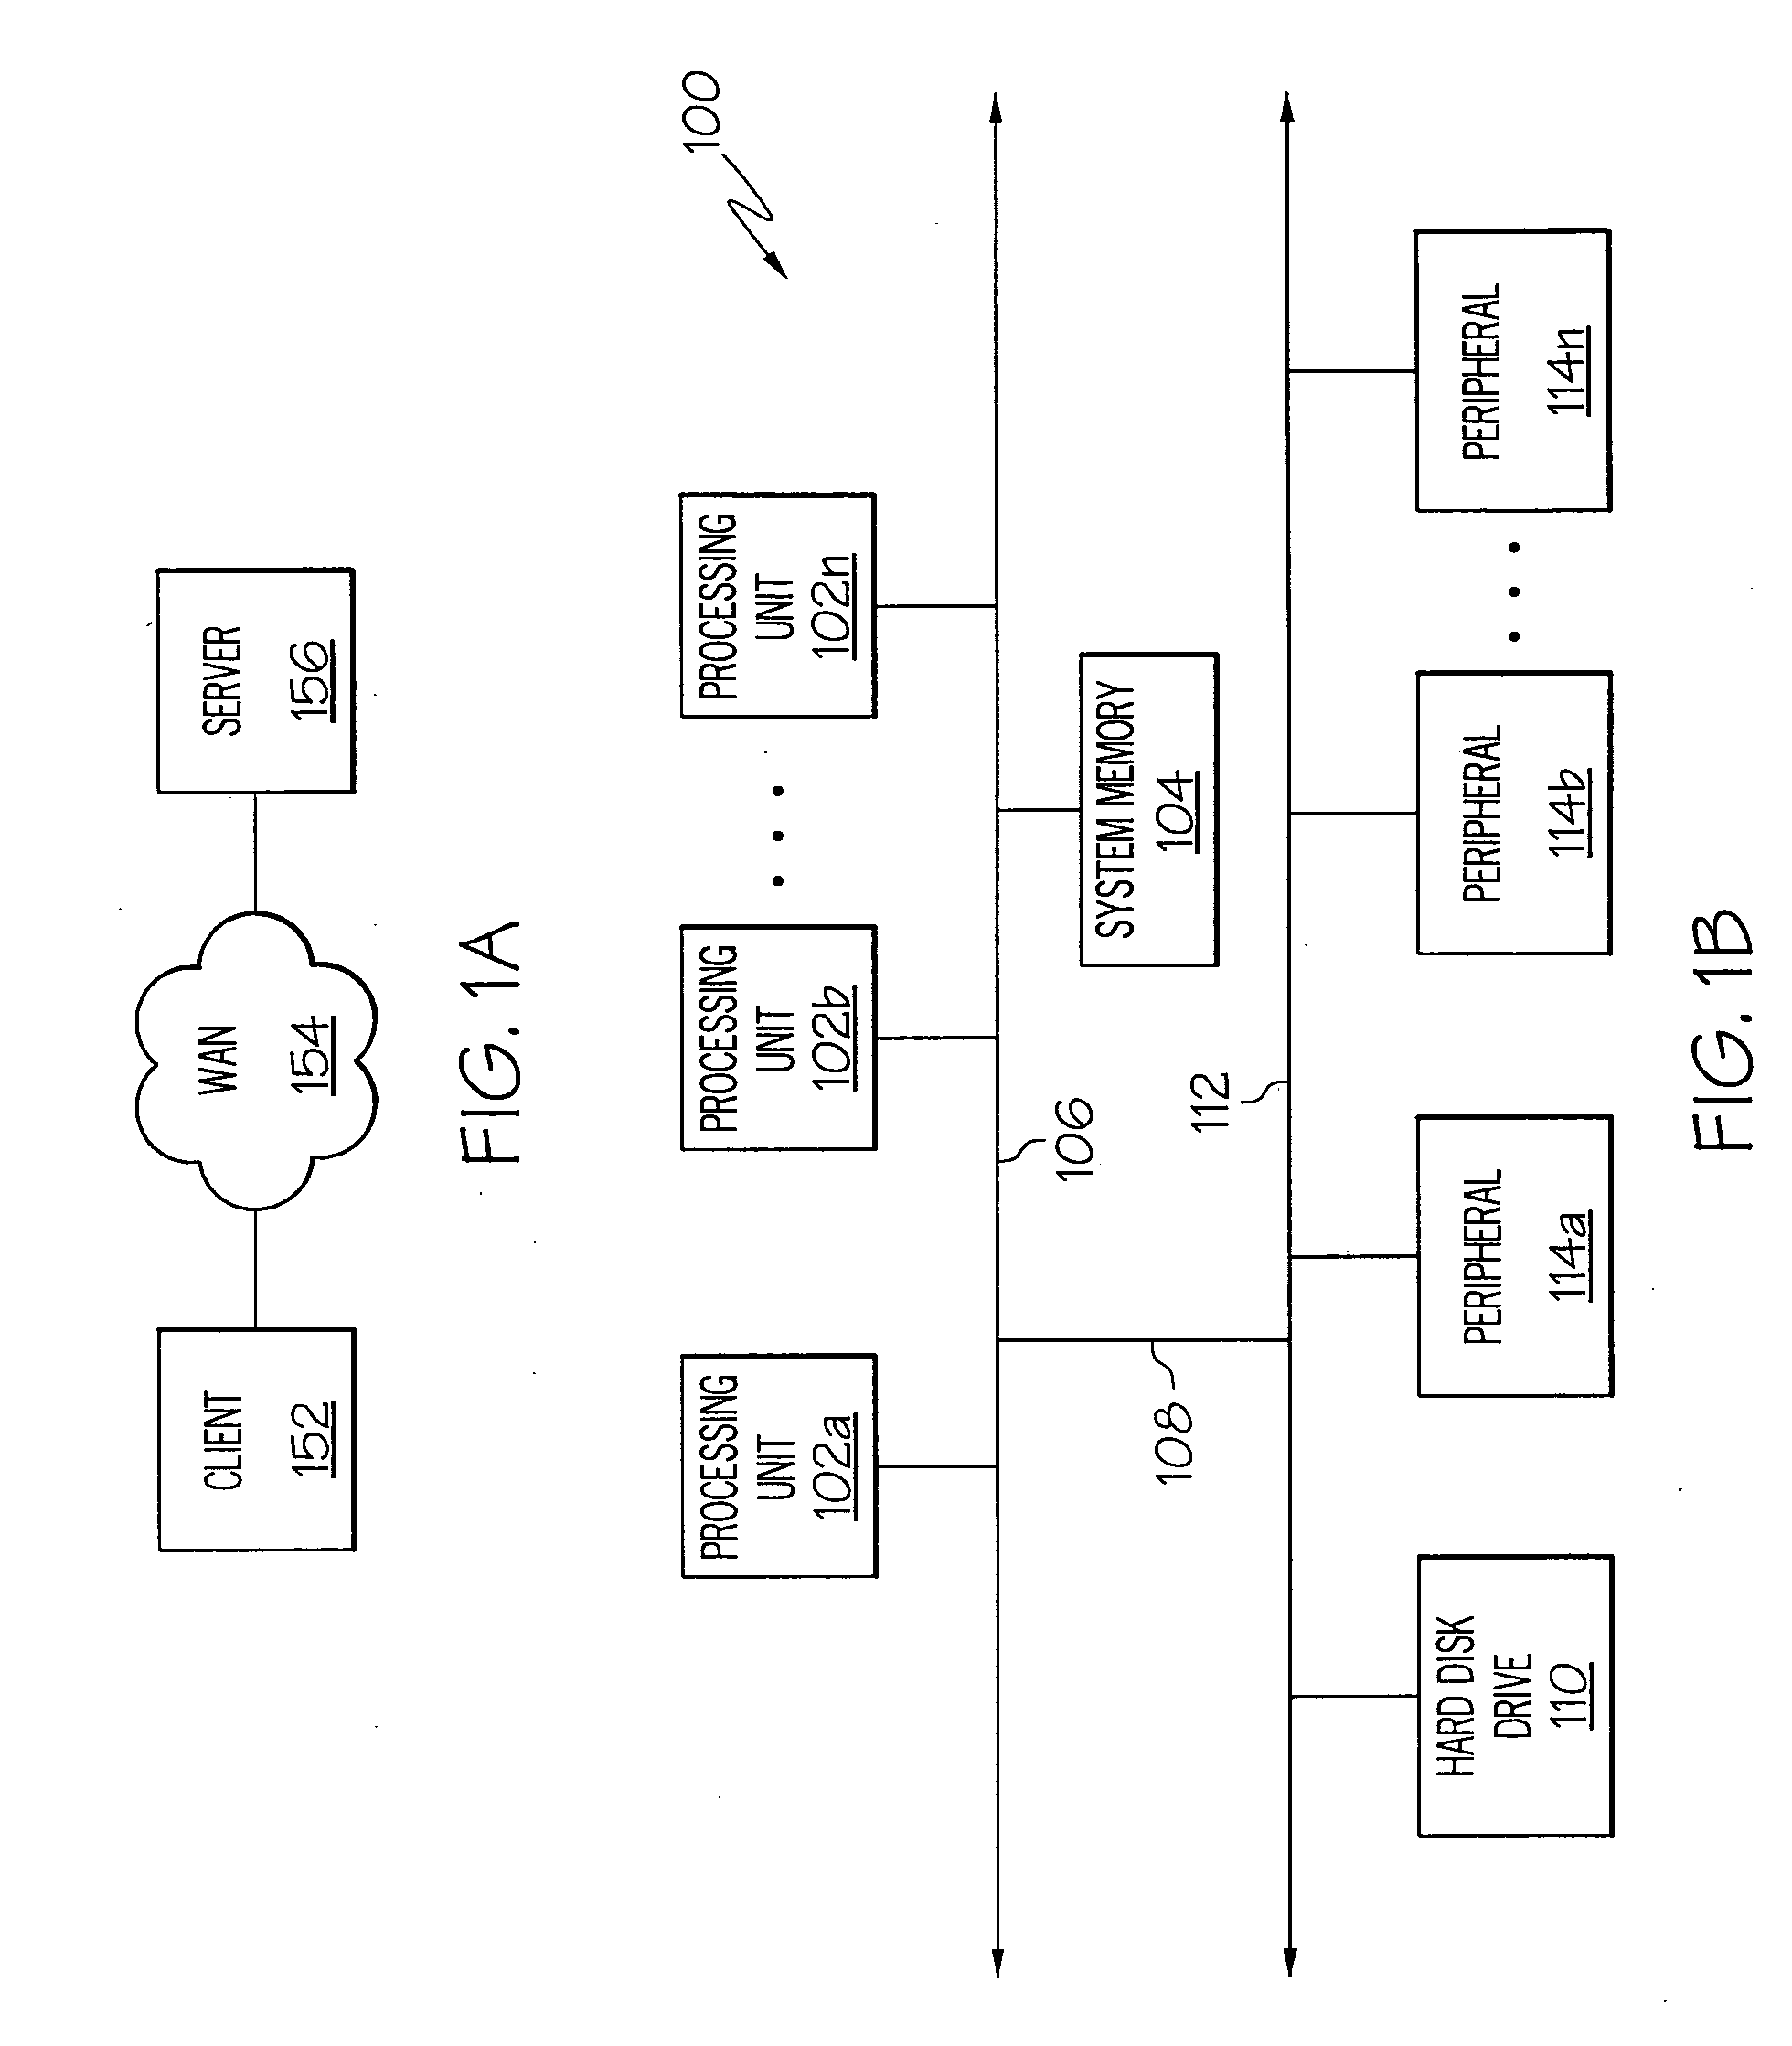 System and method of calculating a projected service cost assessment